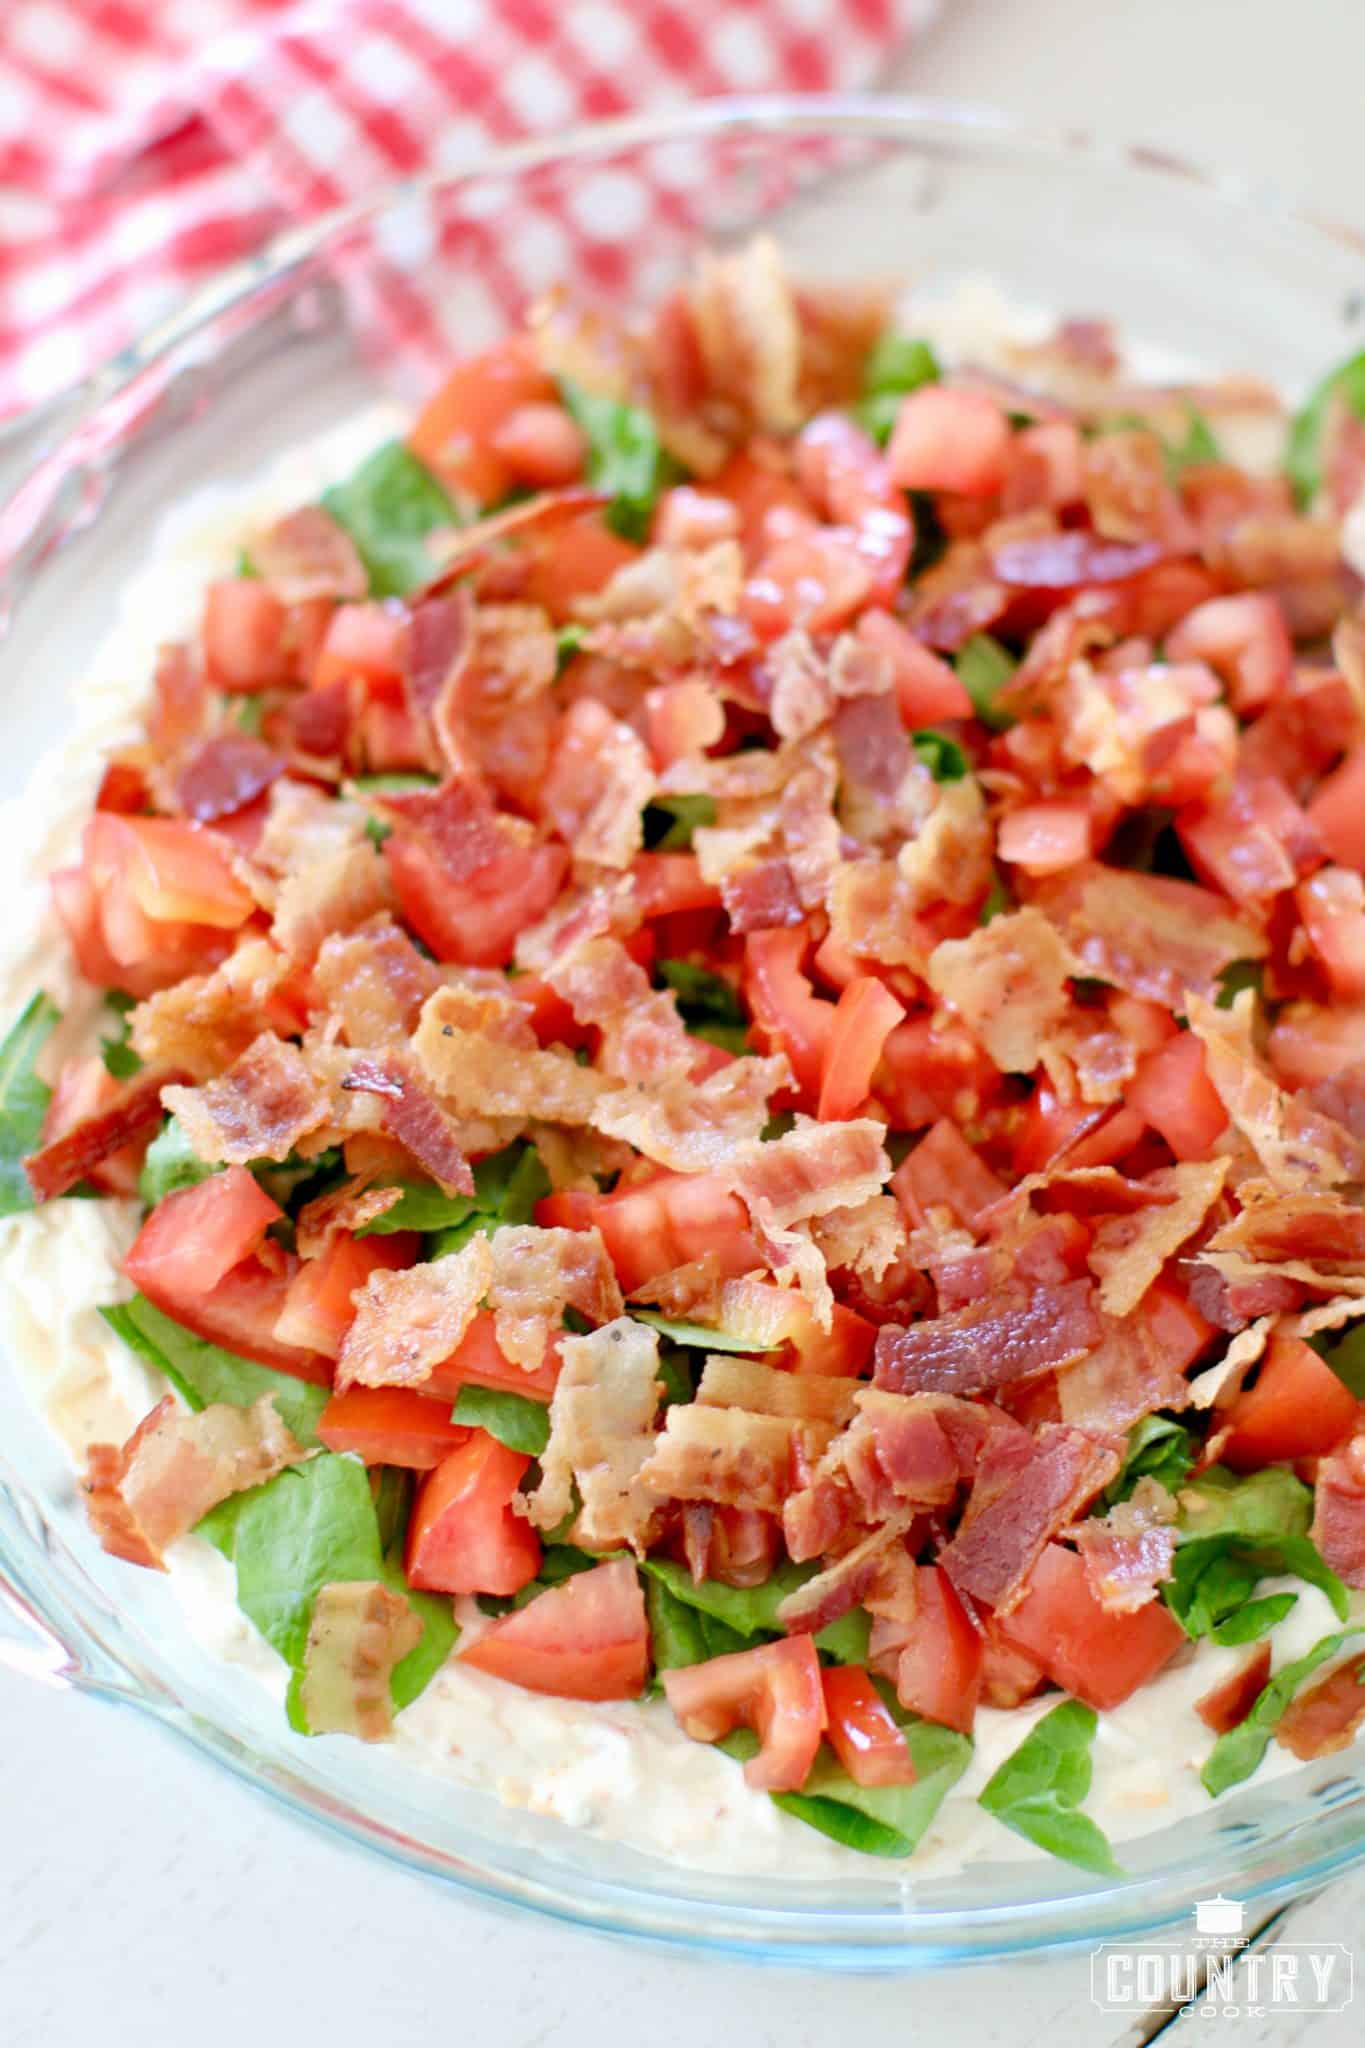 Lettuce, Tomatoes and Bacon on Veggie Cream Cheese Dip in a clear pie dish.